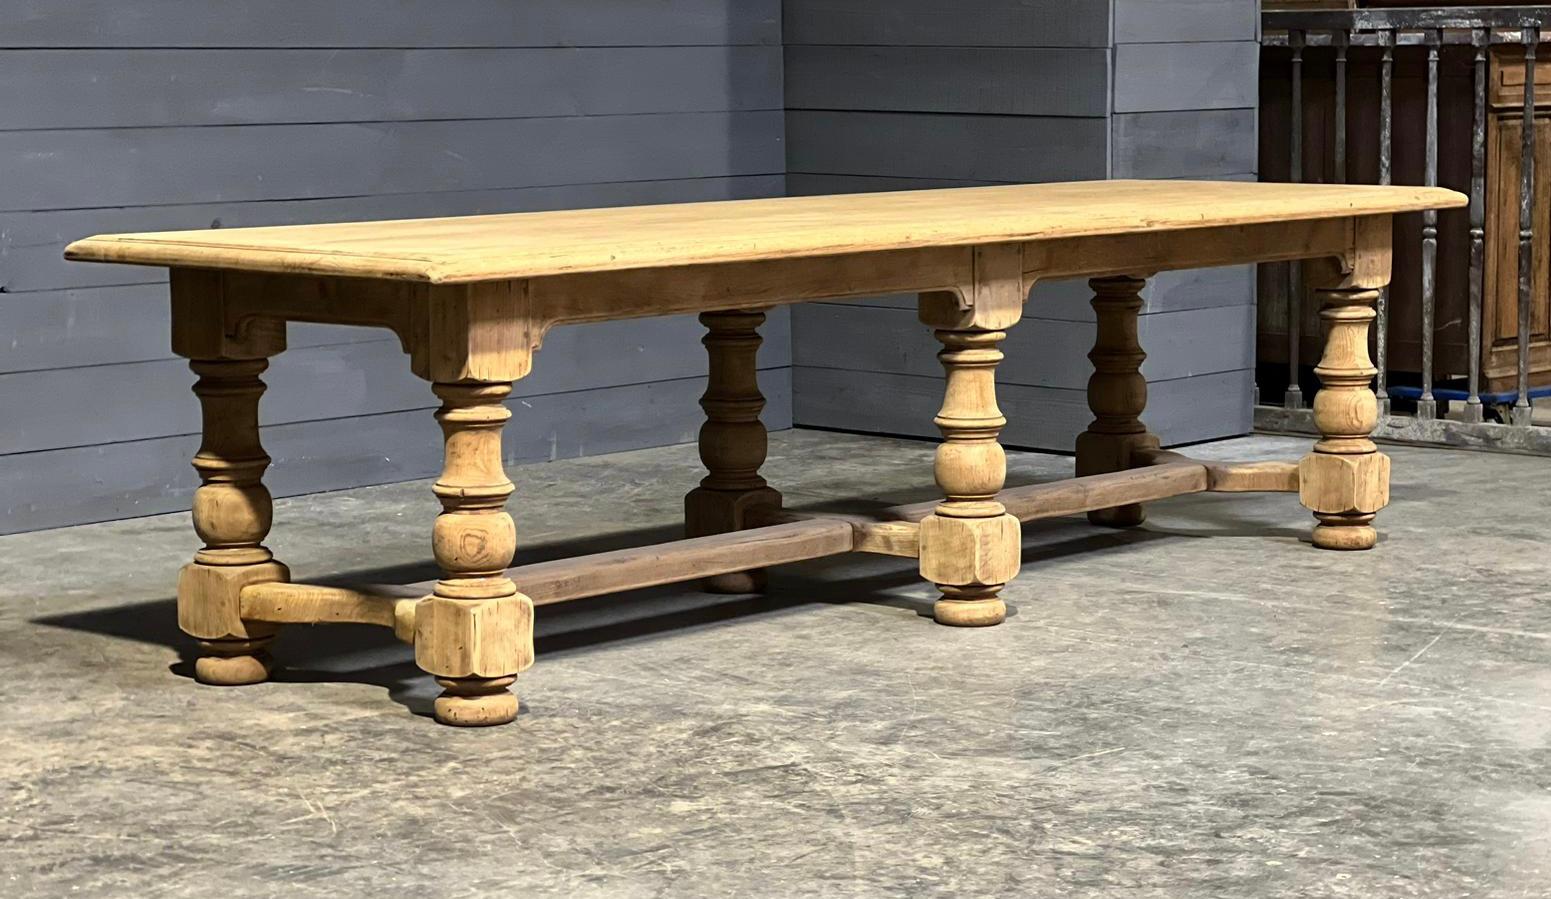 A wonderful Solid Oak Farmhouse Dining Table, long at 3 meters and also deep at 94 cm. Also very good knee clearance at 64 cm.
French in origin and dating to the early 1900s, very good quality construction all pegged joints, this table will be